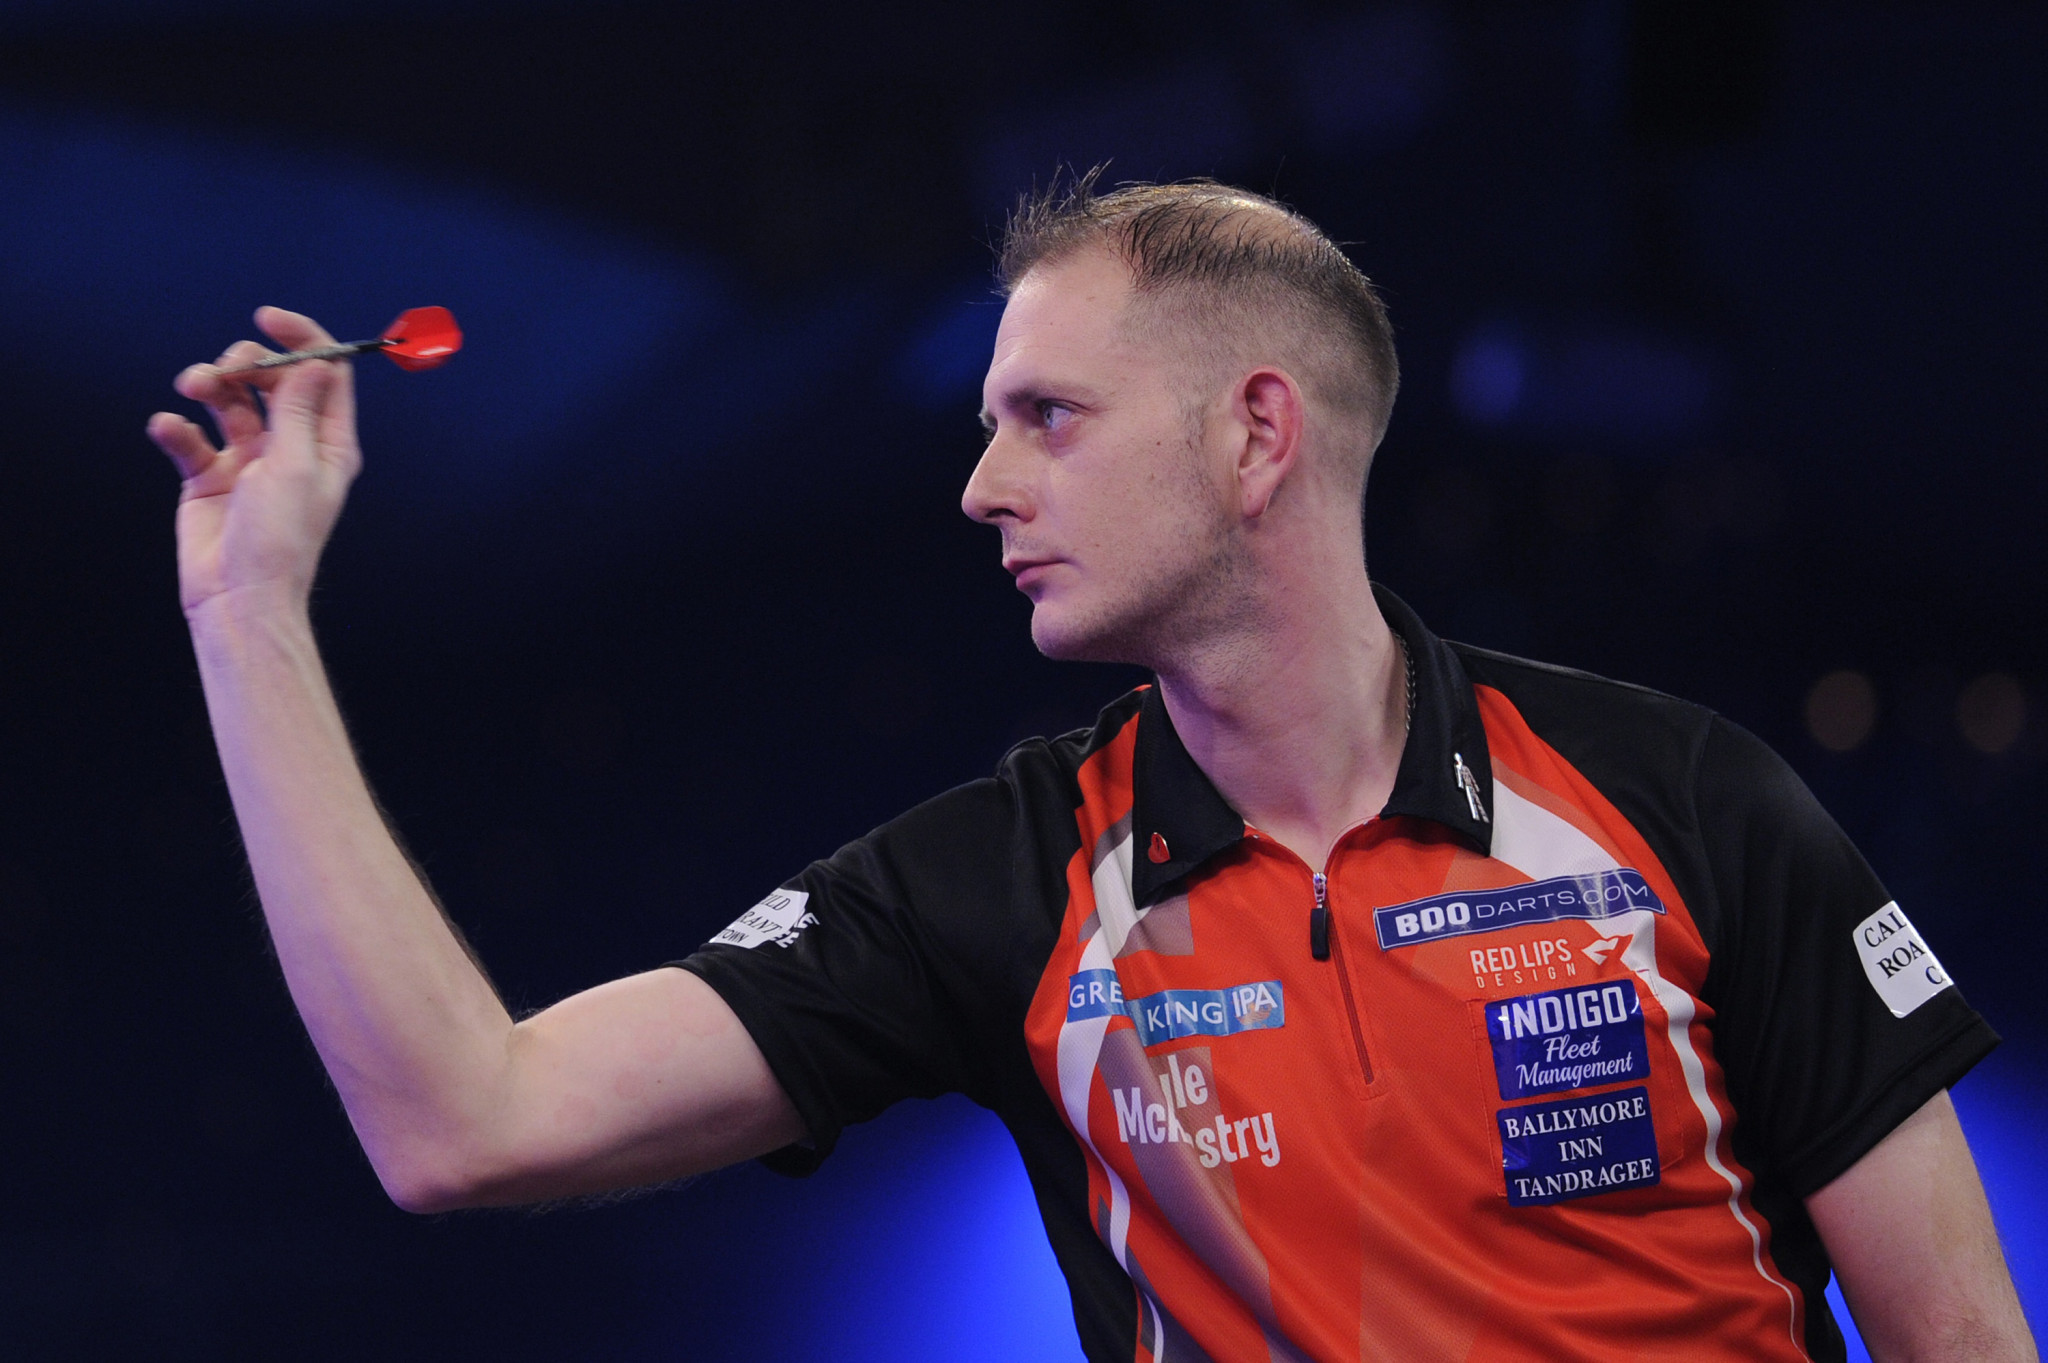 Northern Ireland darts player given eight-year match-fixing ban